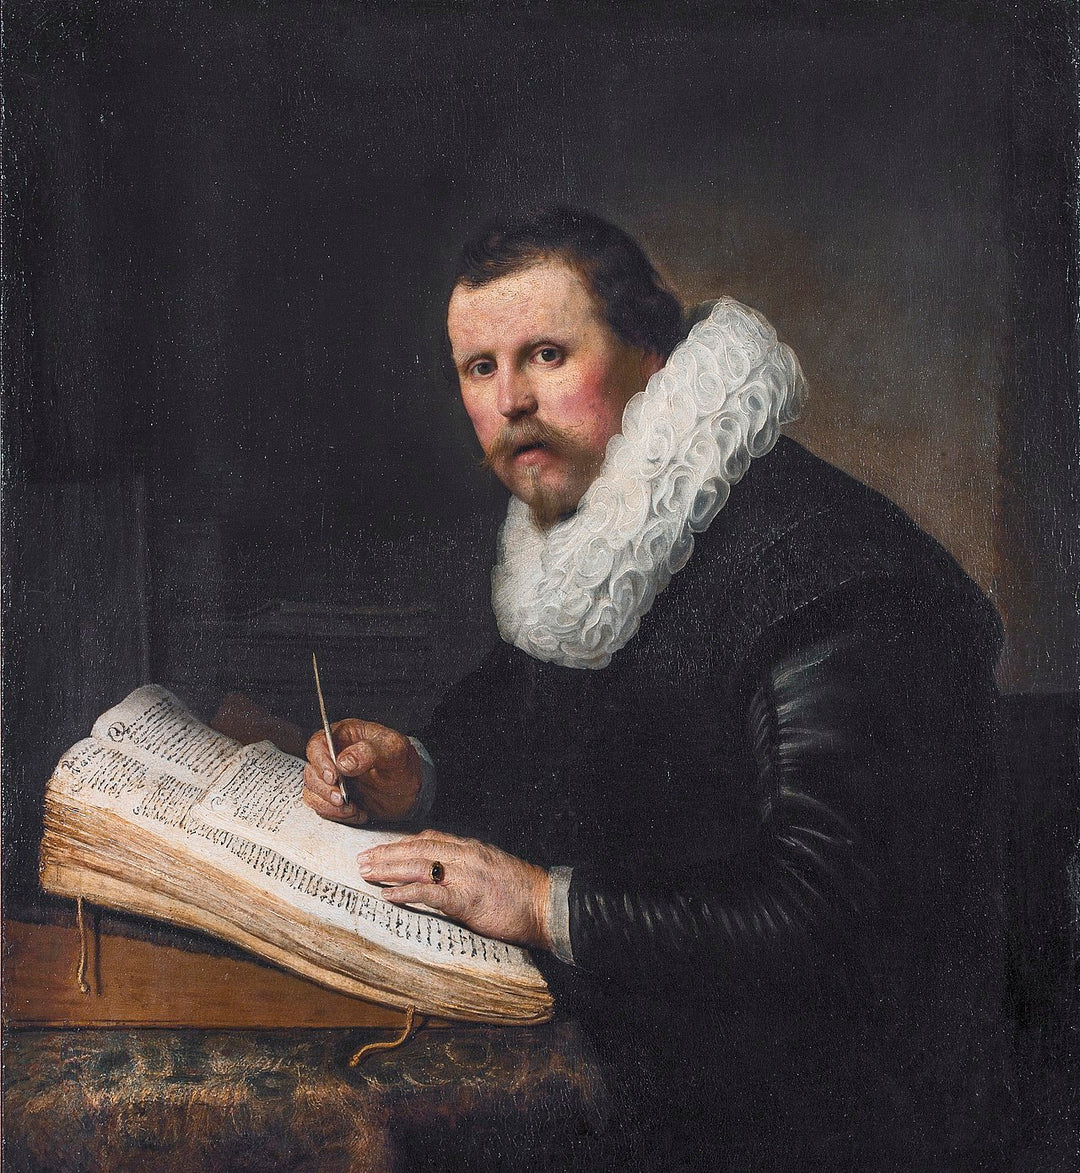 Portrait of a Man at a Writing Desk, possibly Jacob Bruyningh Painting by Rembrandt Oil on Canvas Reproduction